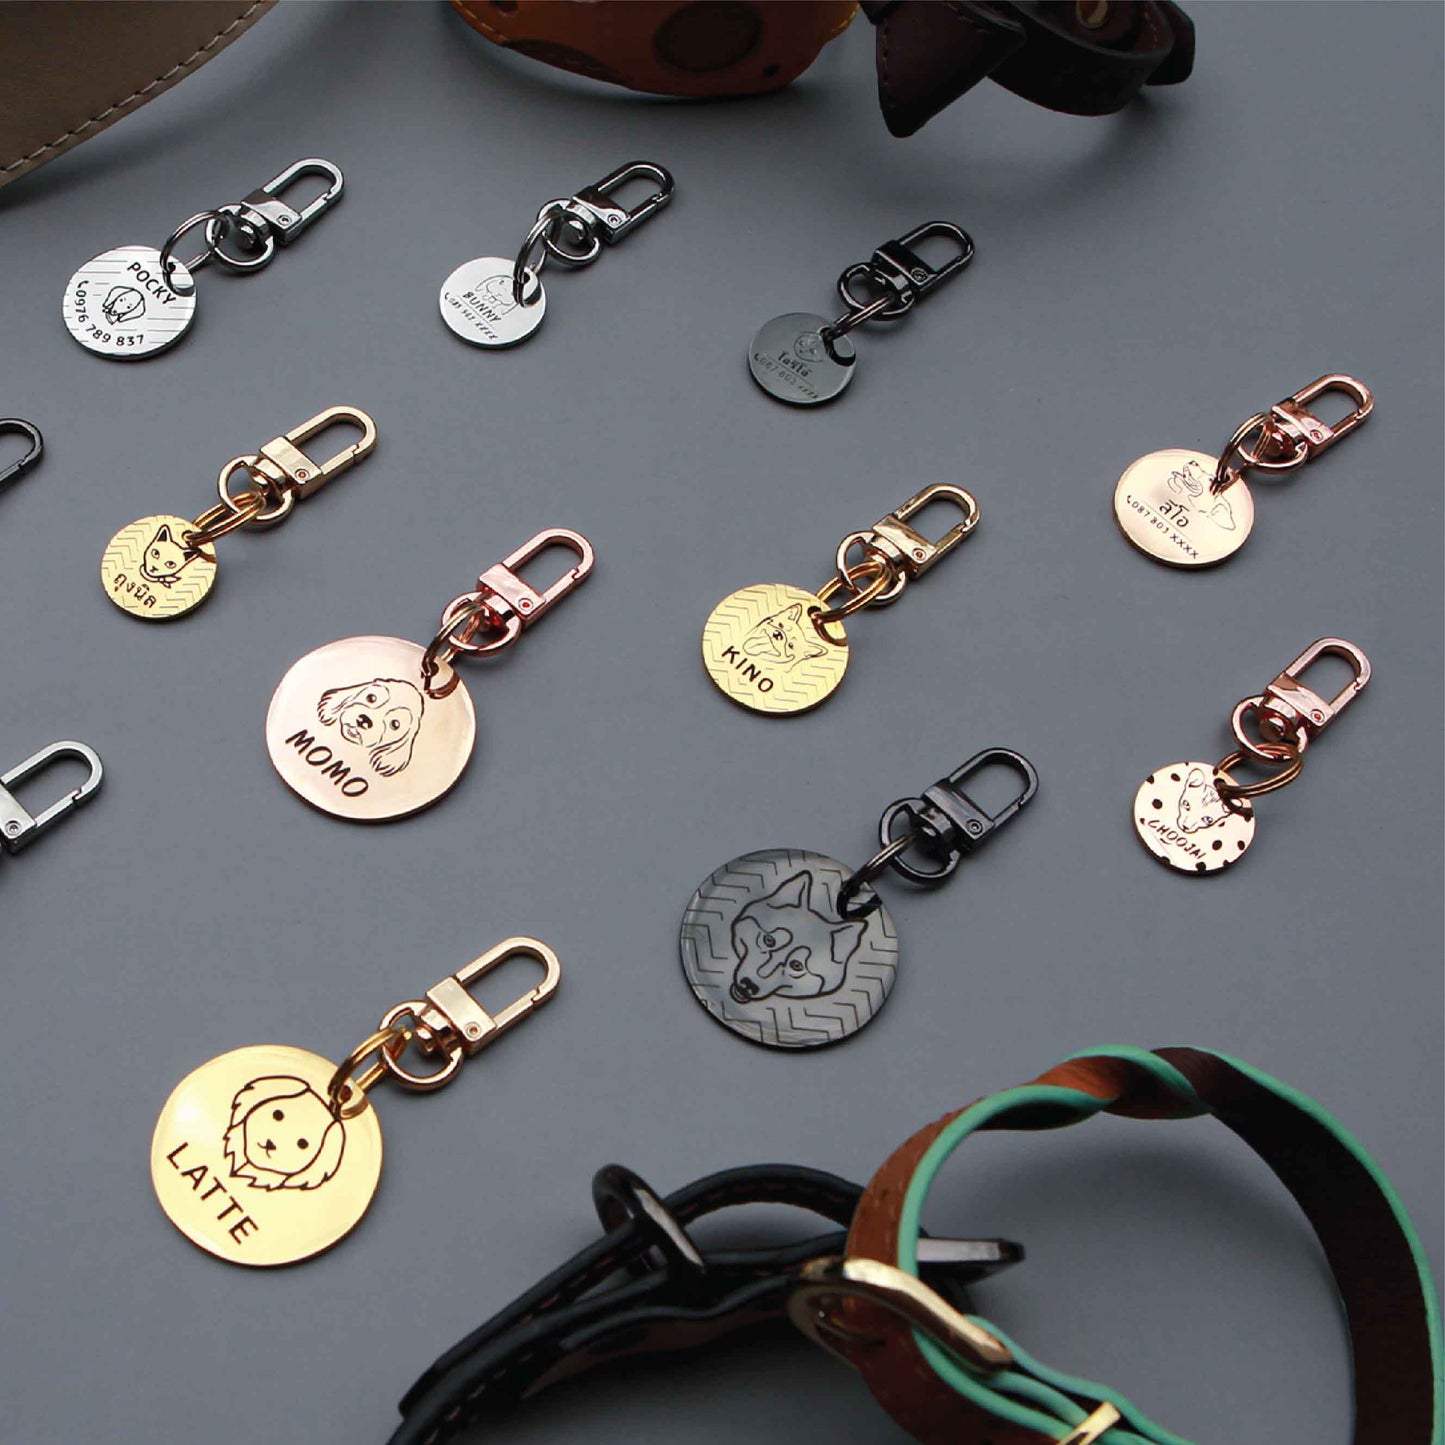 Pet ID tag silver stainless steel (THICK) easy hook Personalized engraved